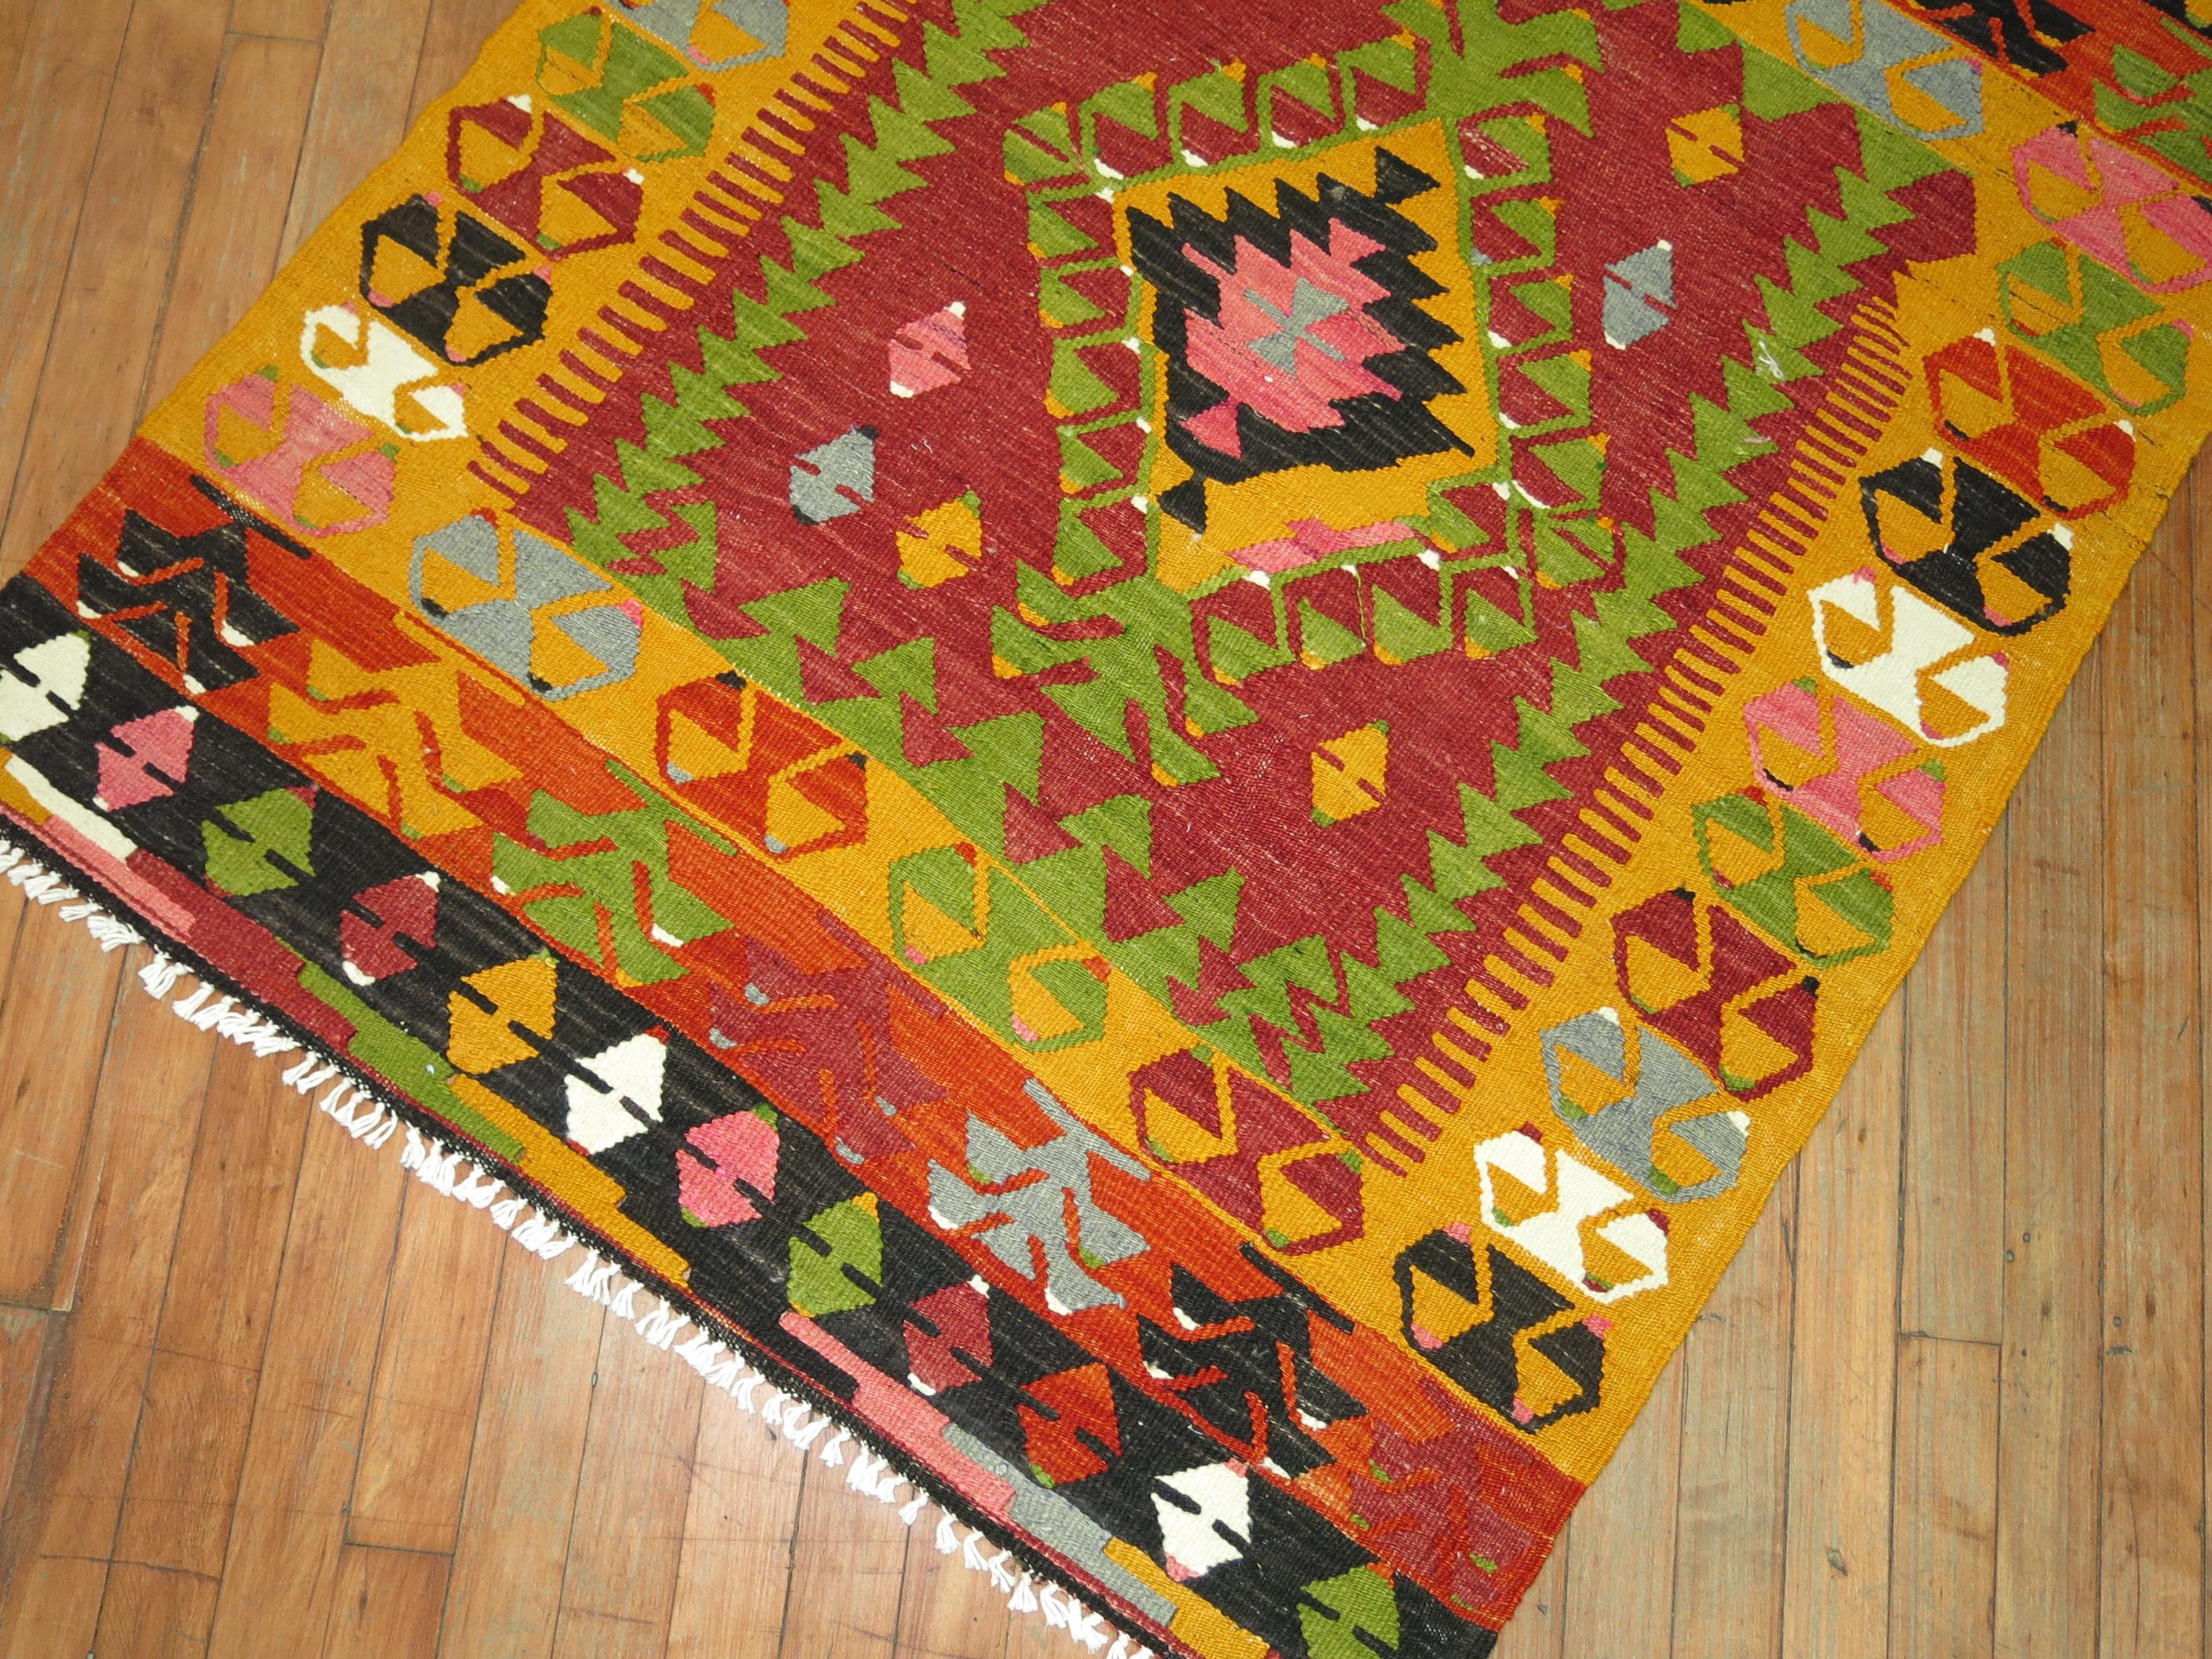 Mid-20th century geometric Turkish Kilim in bright saturated colors. Bright pink, green, red highlight this delightful little gem.

Measures: 3'4